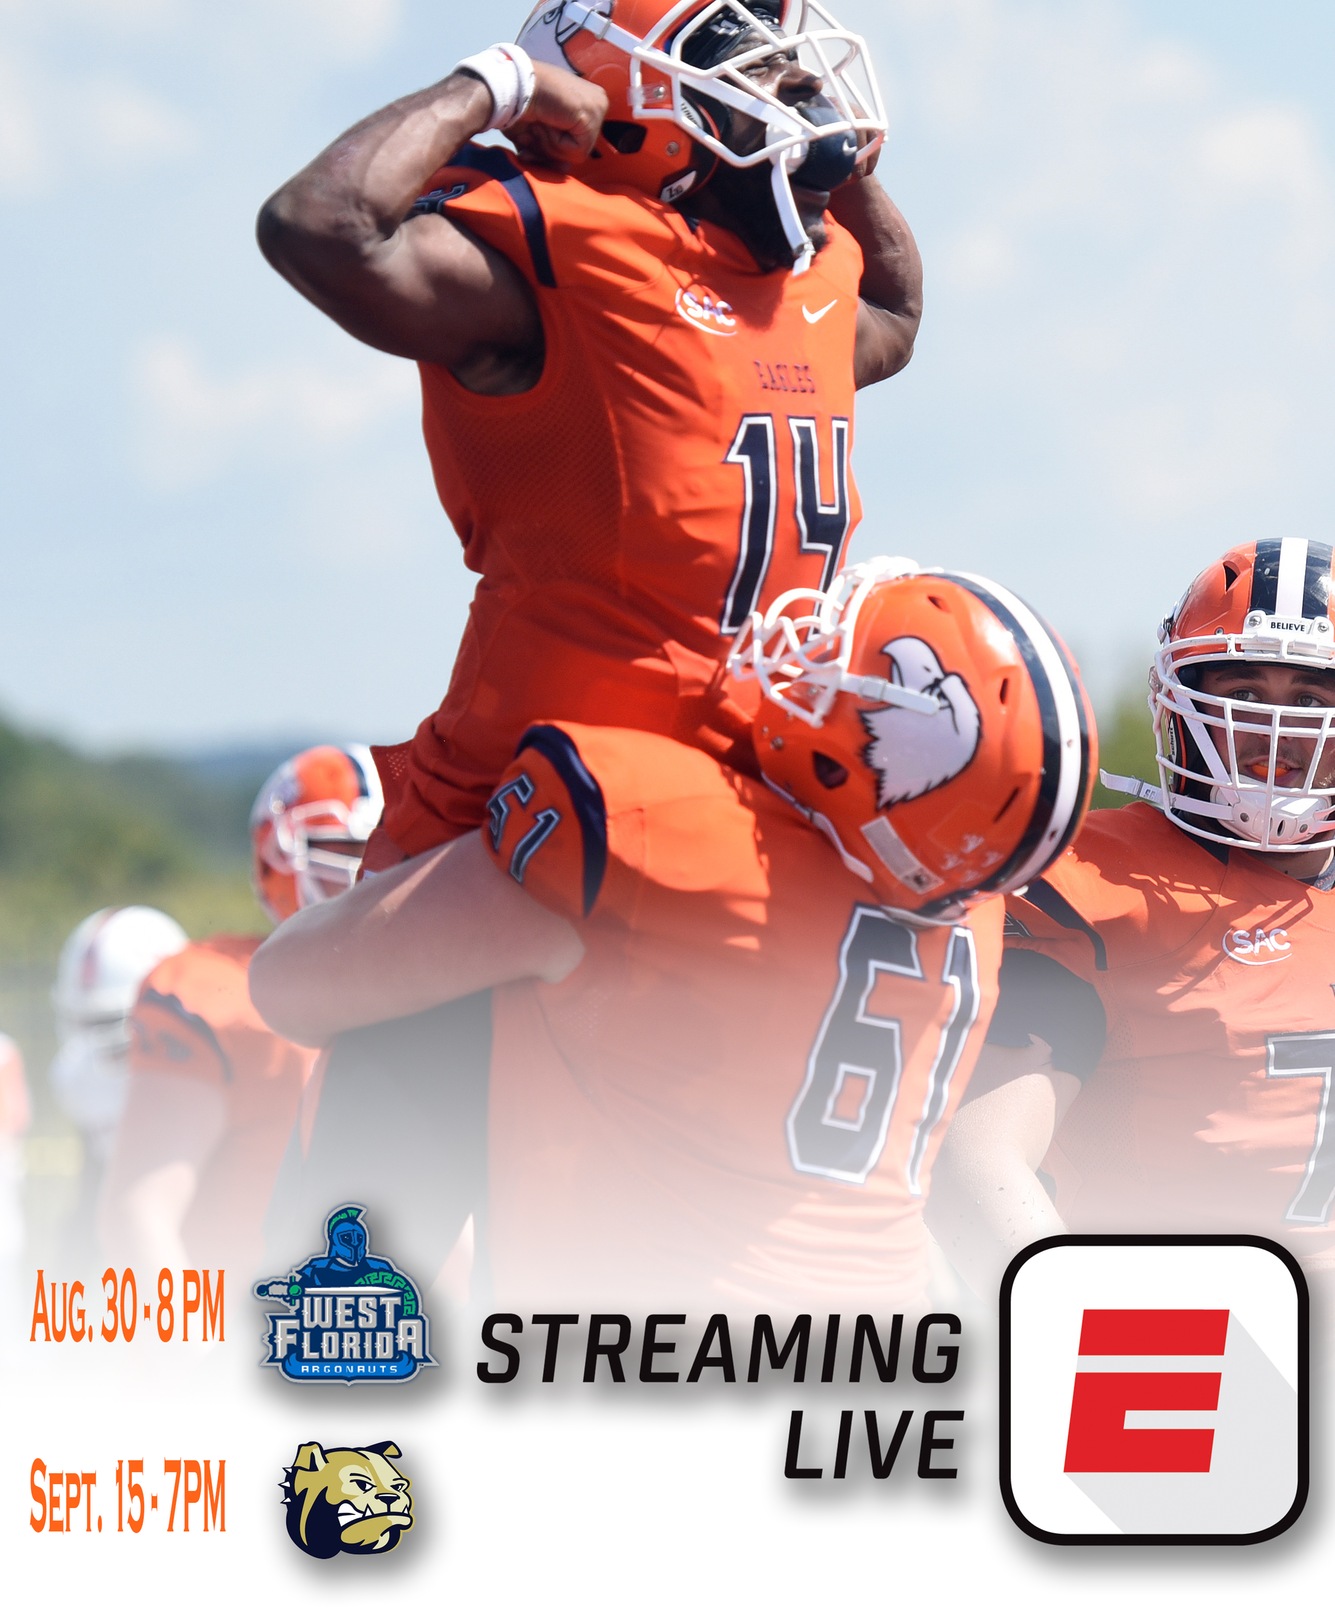 Carson-Newman Football to appear twice in NCAA Division II Showcase games of the week